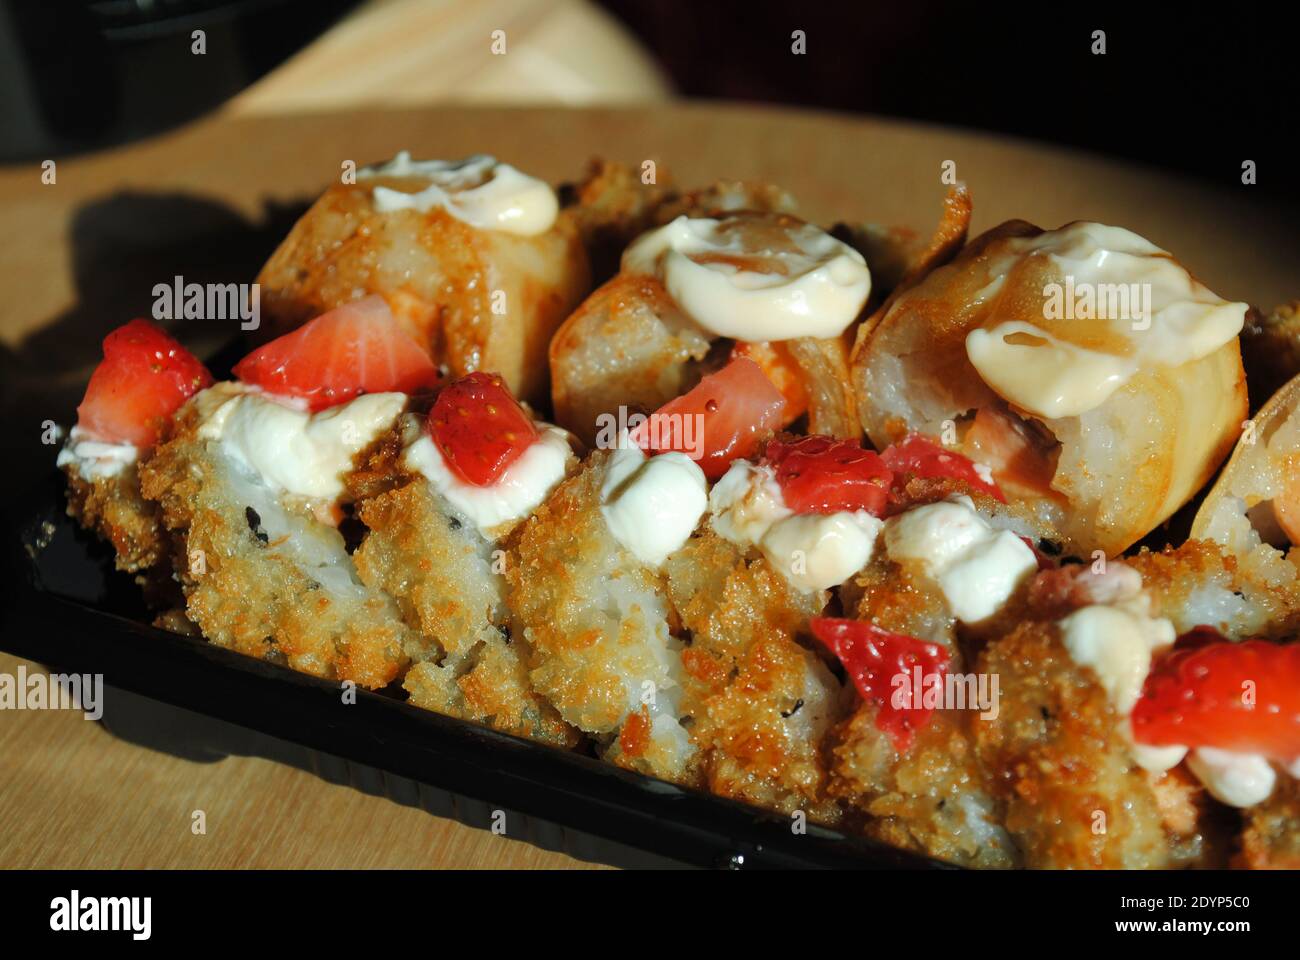 A display of freshly prepared fried sushi pieces ready to be enjoyed. Stock Photo